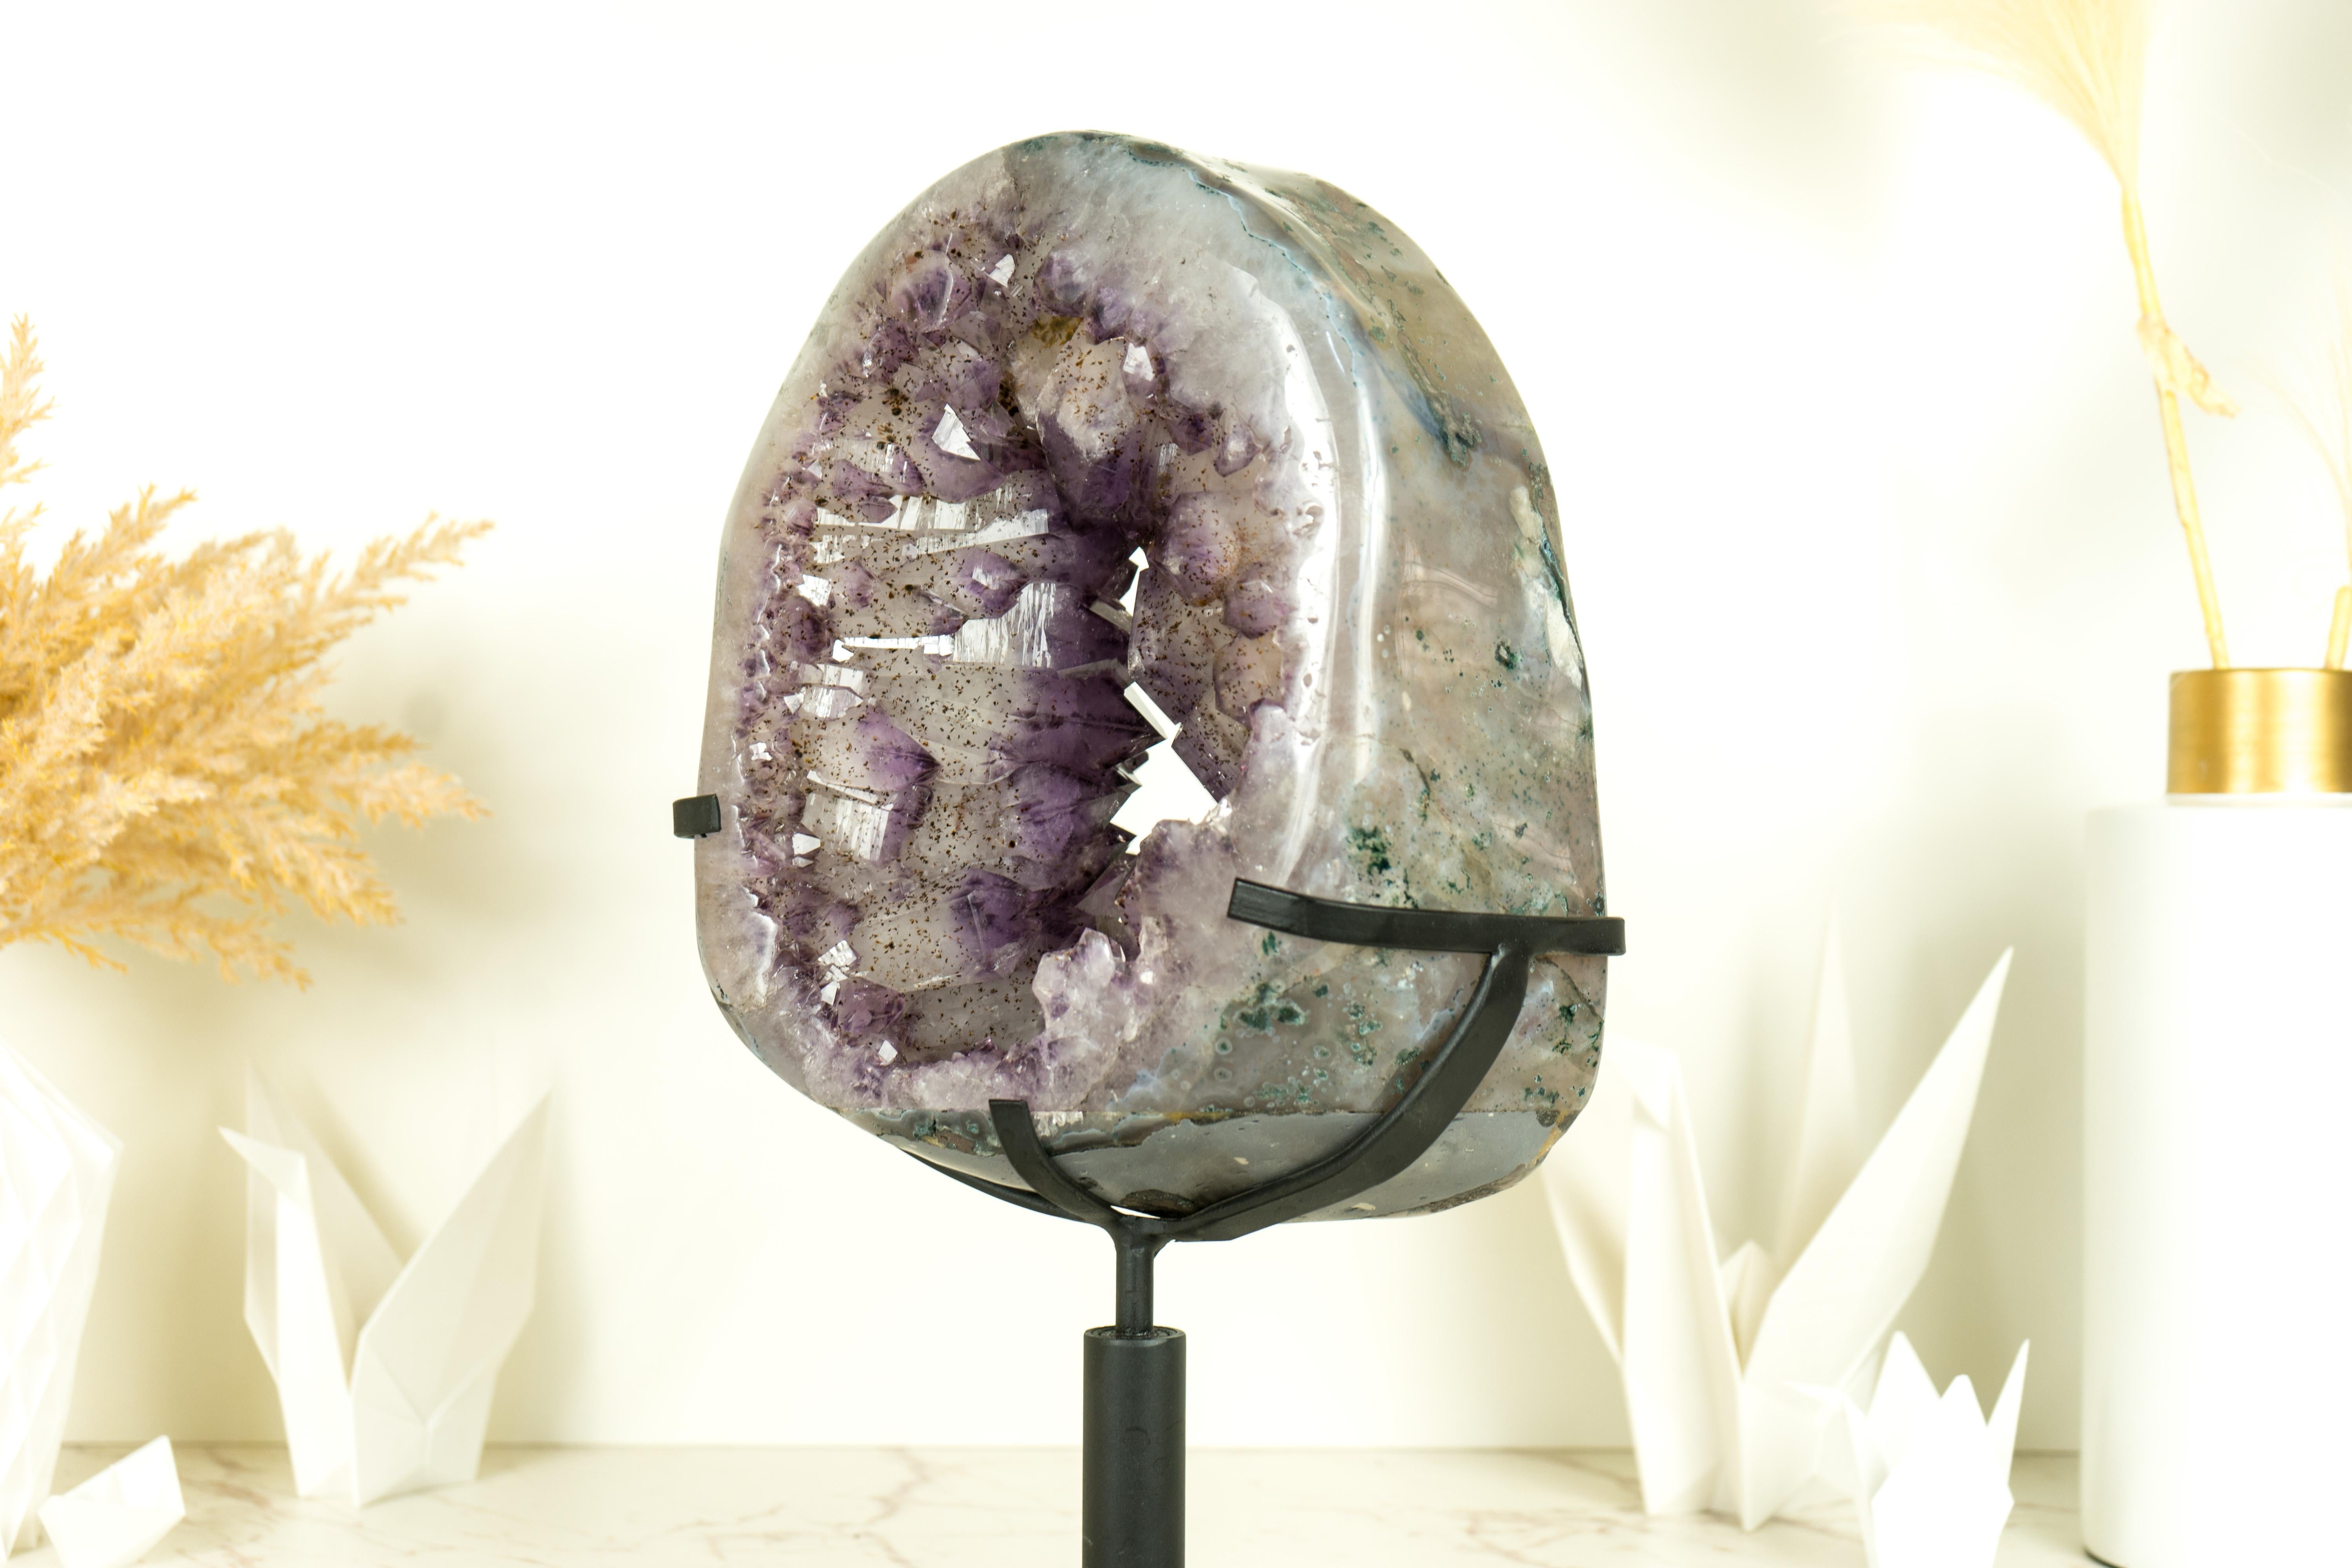 Found only in the Poncio Mine, Amethyst Geodes with Crown formations are a very rare form of Amethyst where the crystal points form a regal crown-like structure, elevating them from the usual druzy formations, a rare and highly regarded amethyst